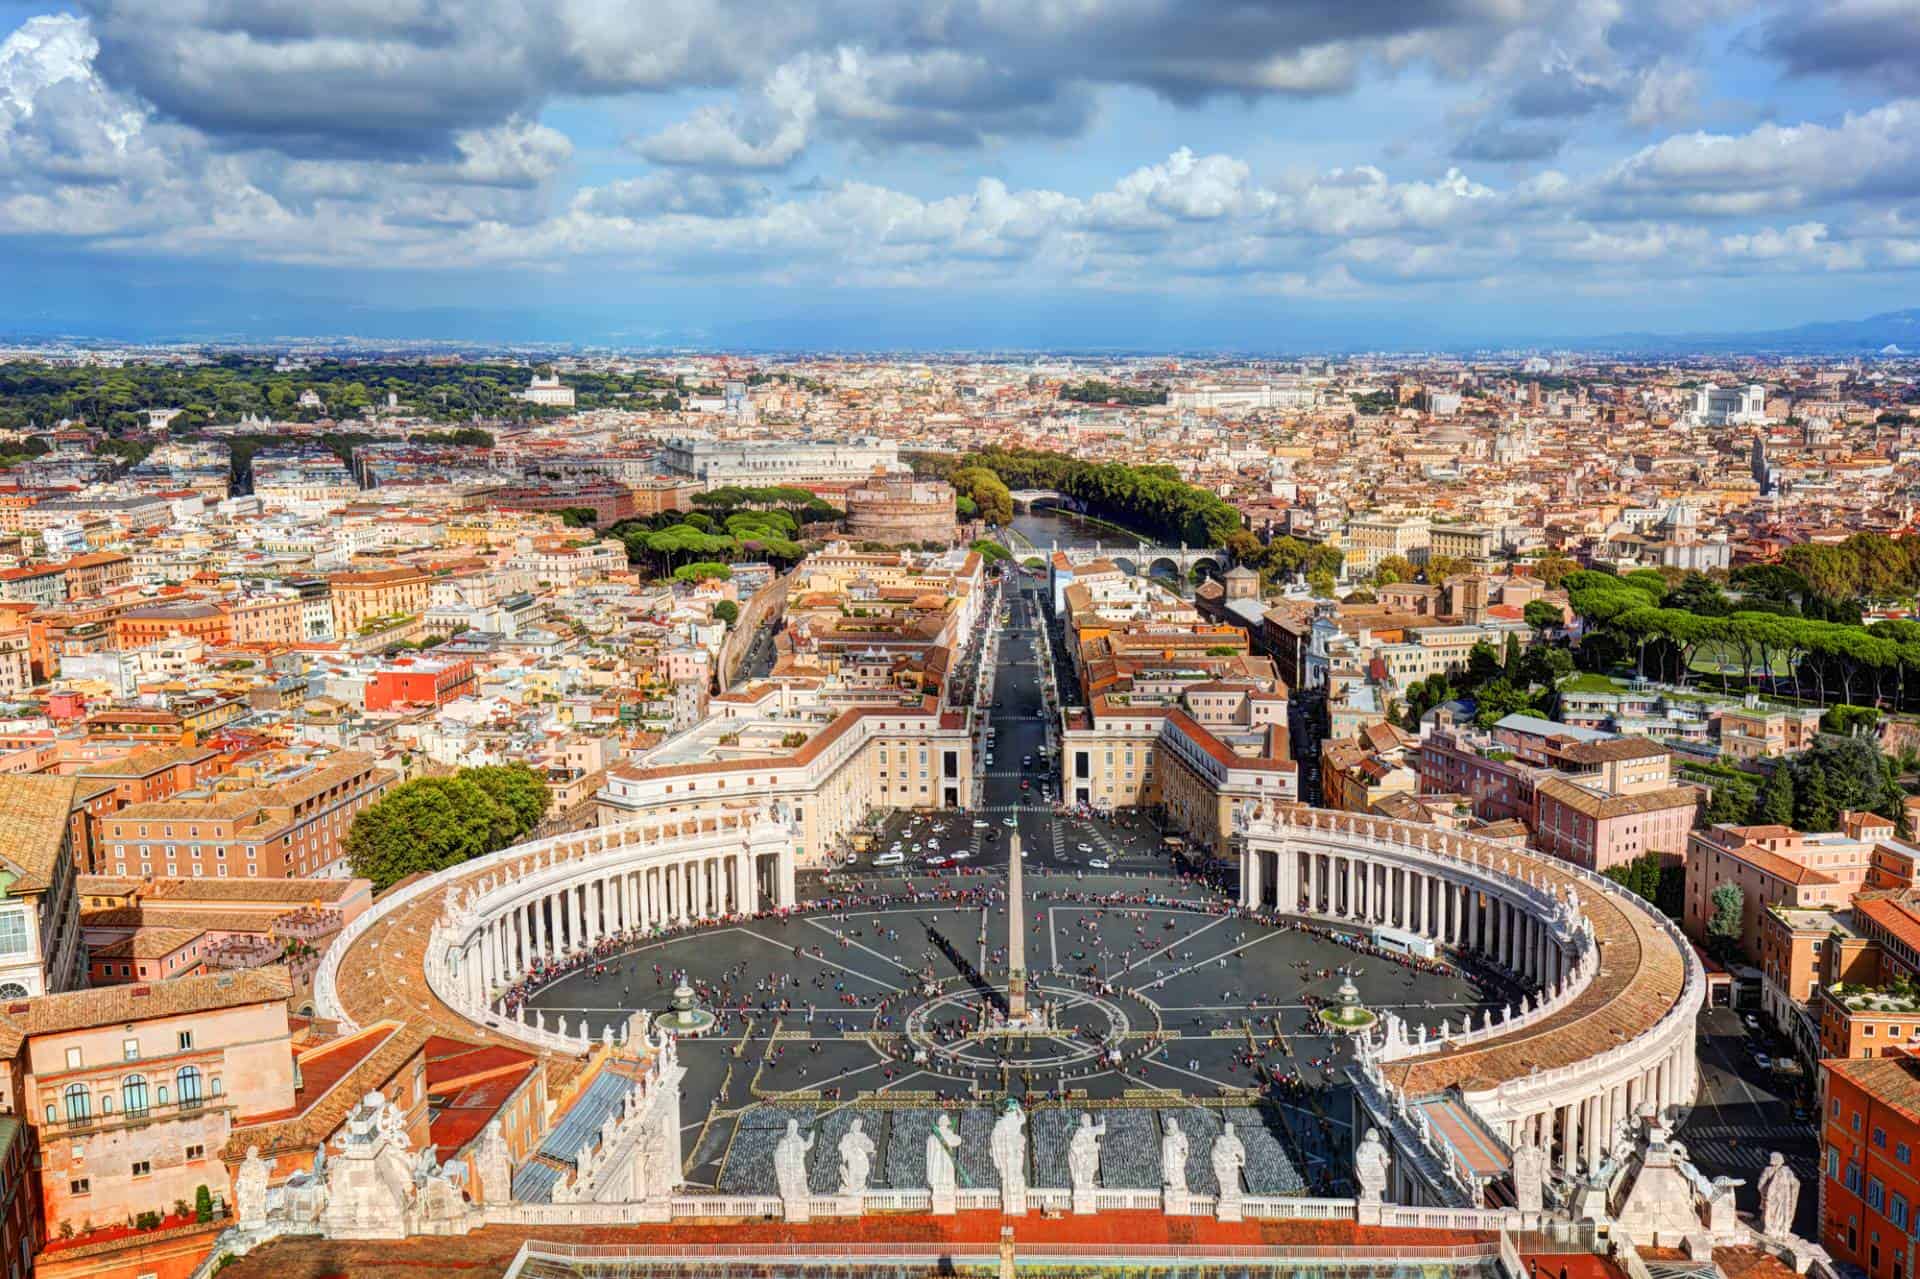 What are the Top 5 Best Views of Rome?